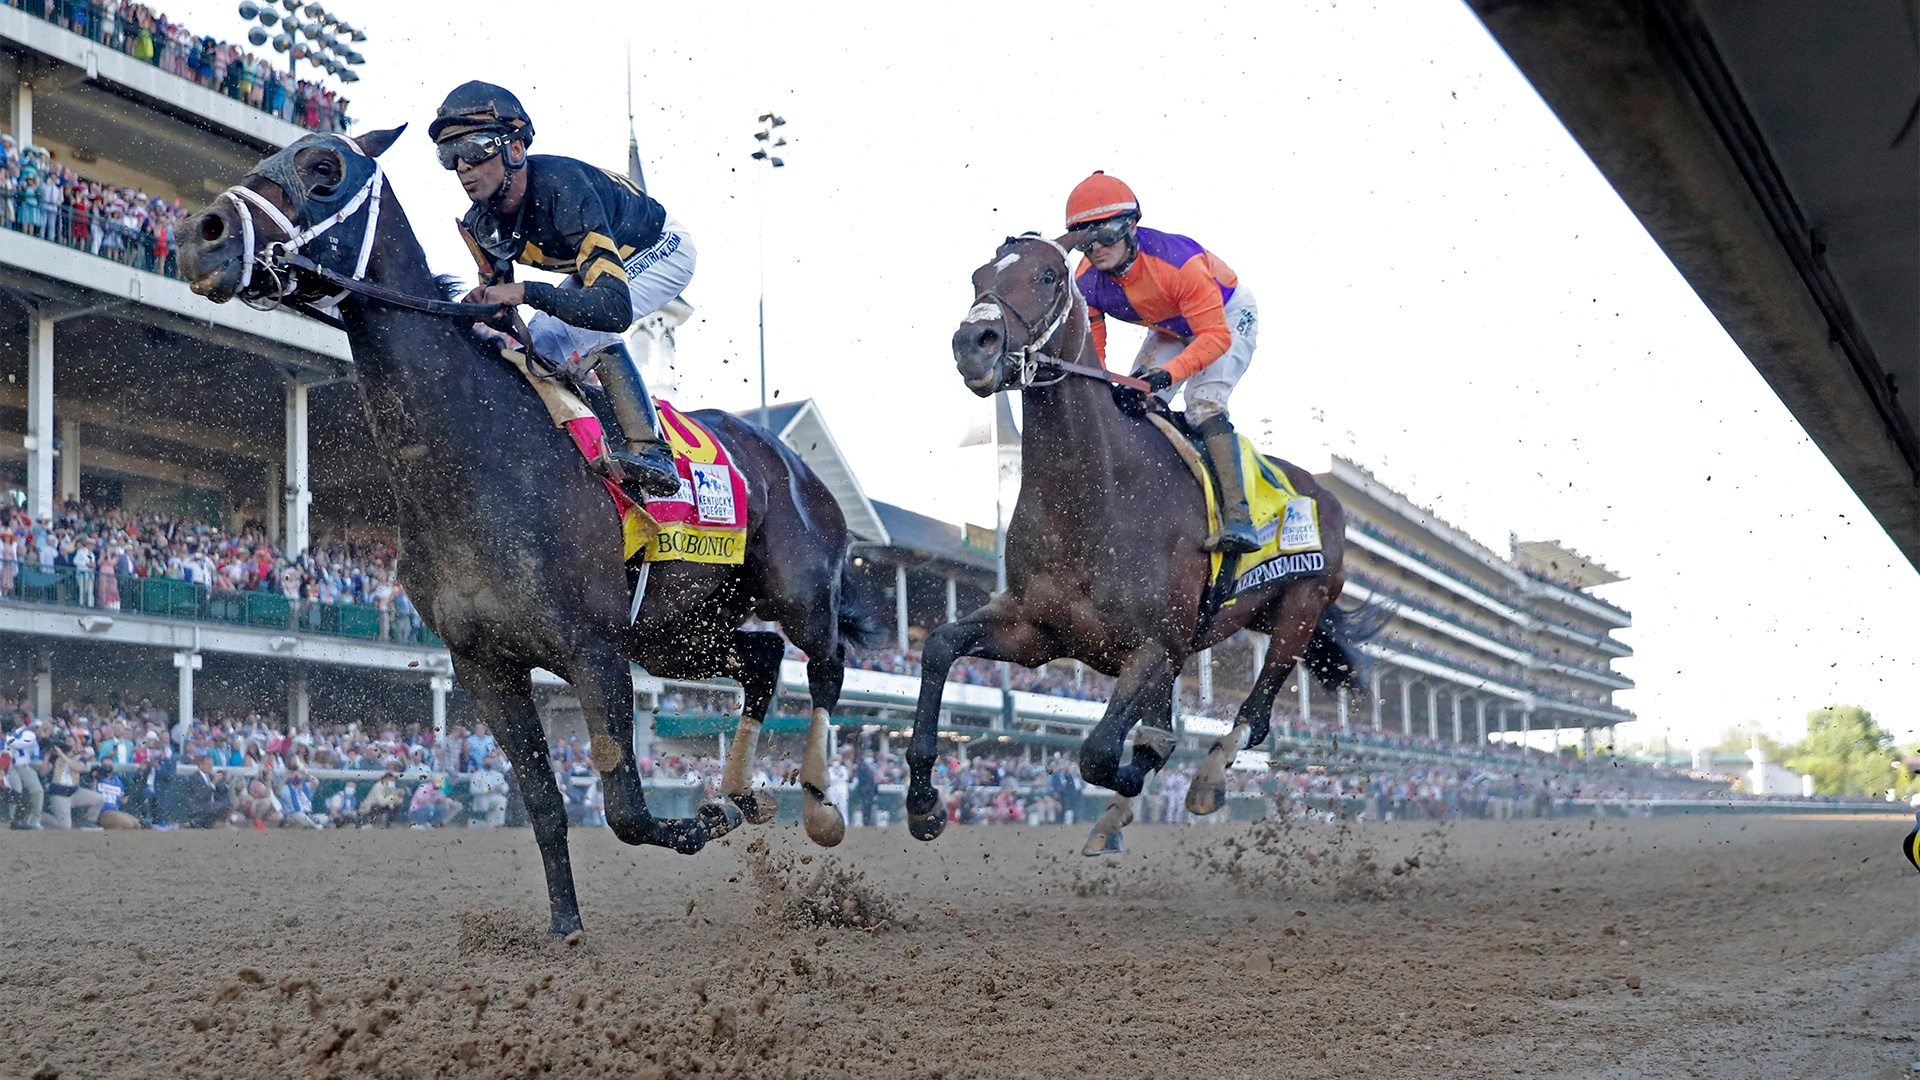 Kentucky Derby, 2022 schedule, TV coverage, Not-to-be-missed event, 1920x1080 Full HD Desktop